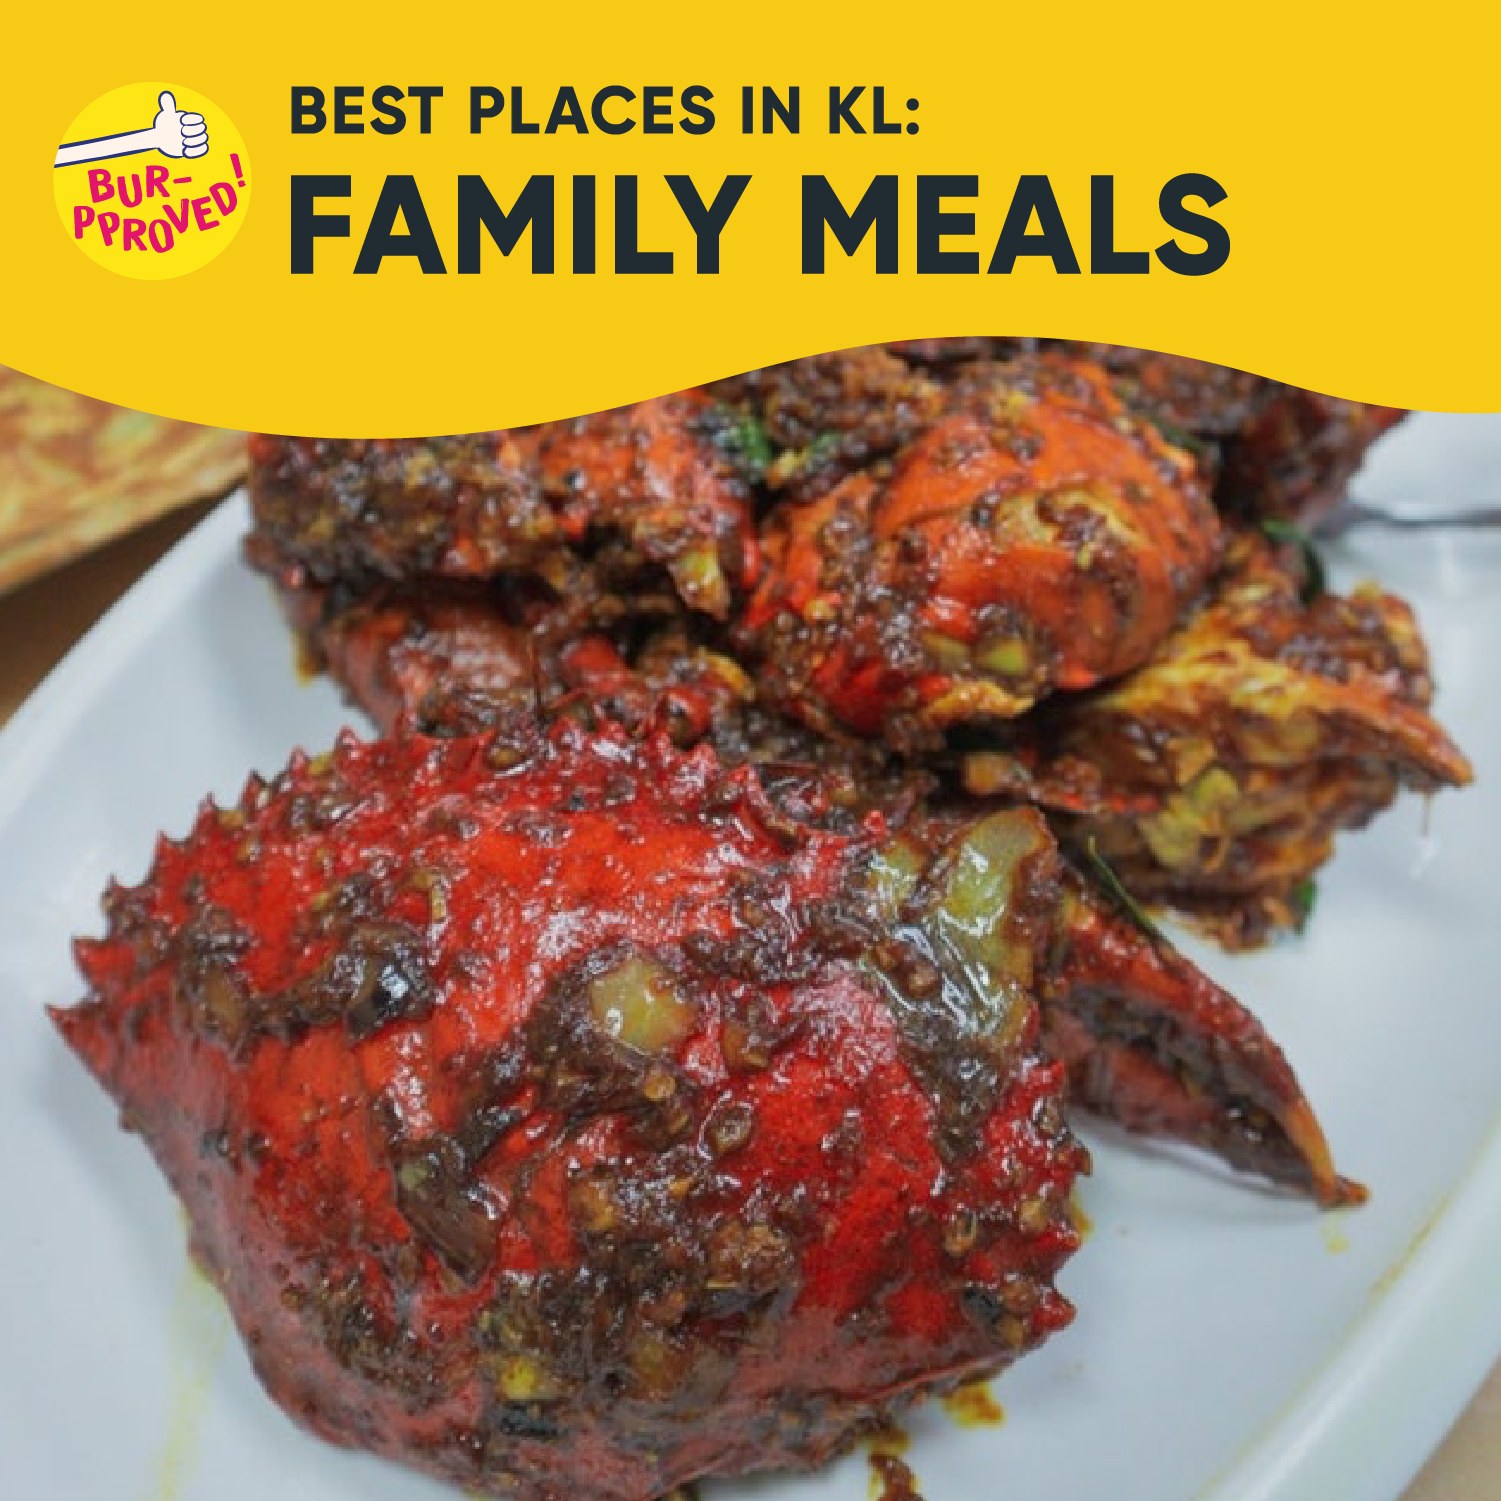 Best Places for Family Meals in KL | Burpple Guides